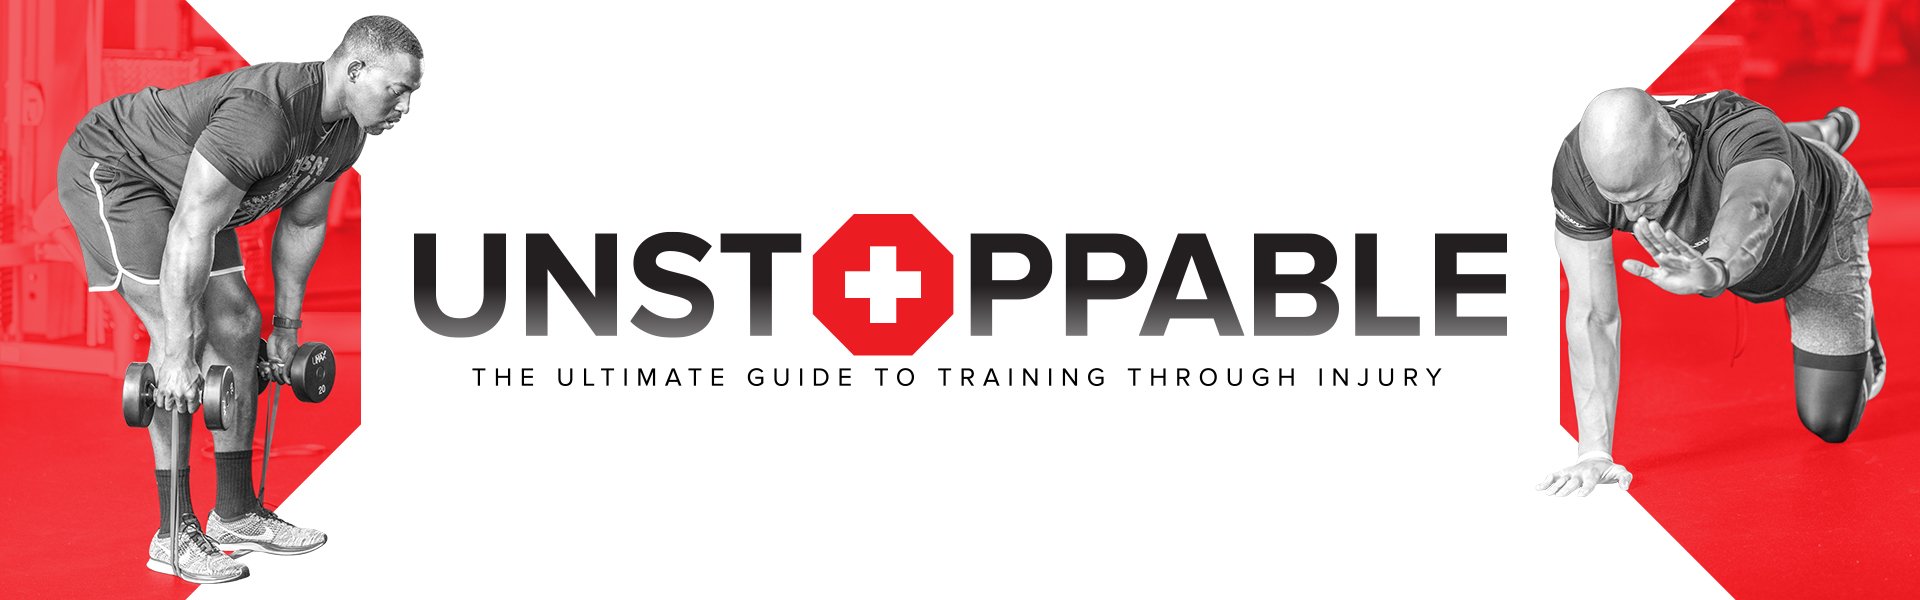 Unstoppable: The Ultimate Guide to Training Through Injury